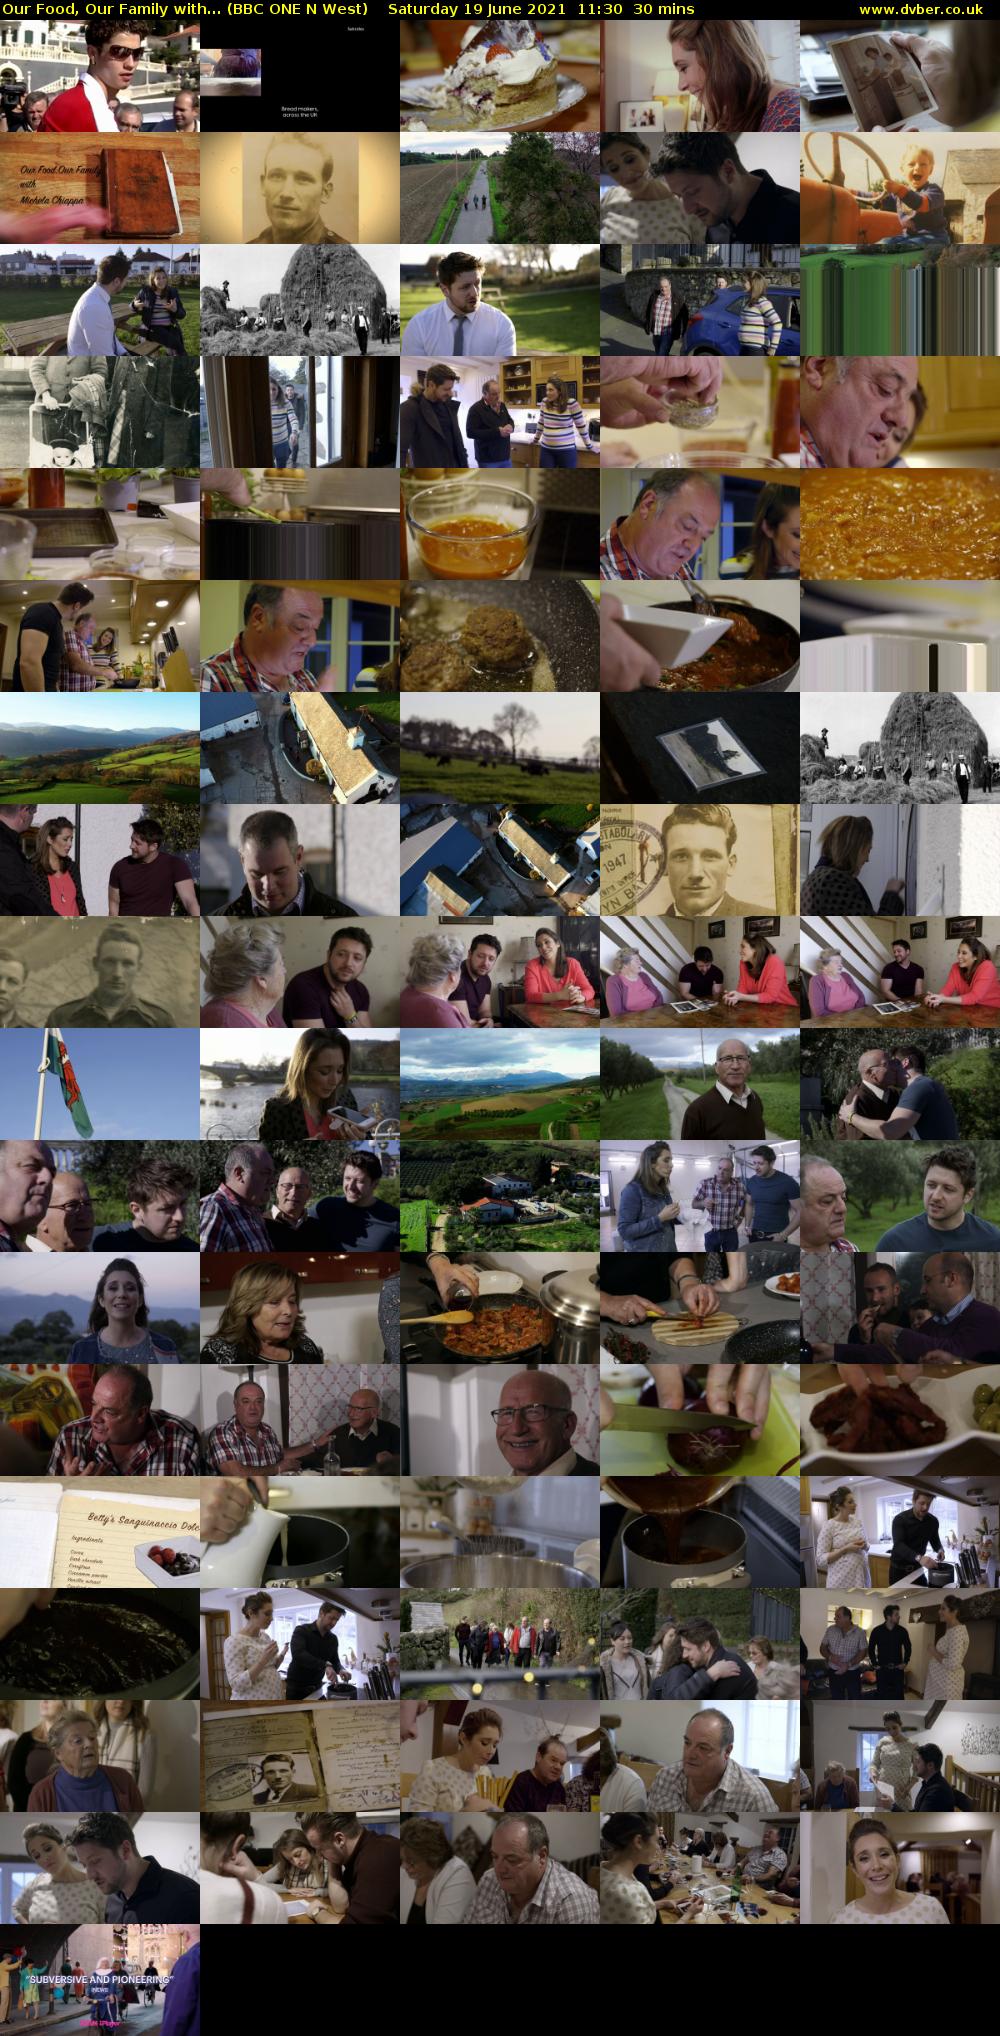 Our Food, Our Family with... (BBC ONE N West) Saturday 19 June 2021 11:30 - 12:00